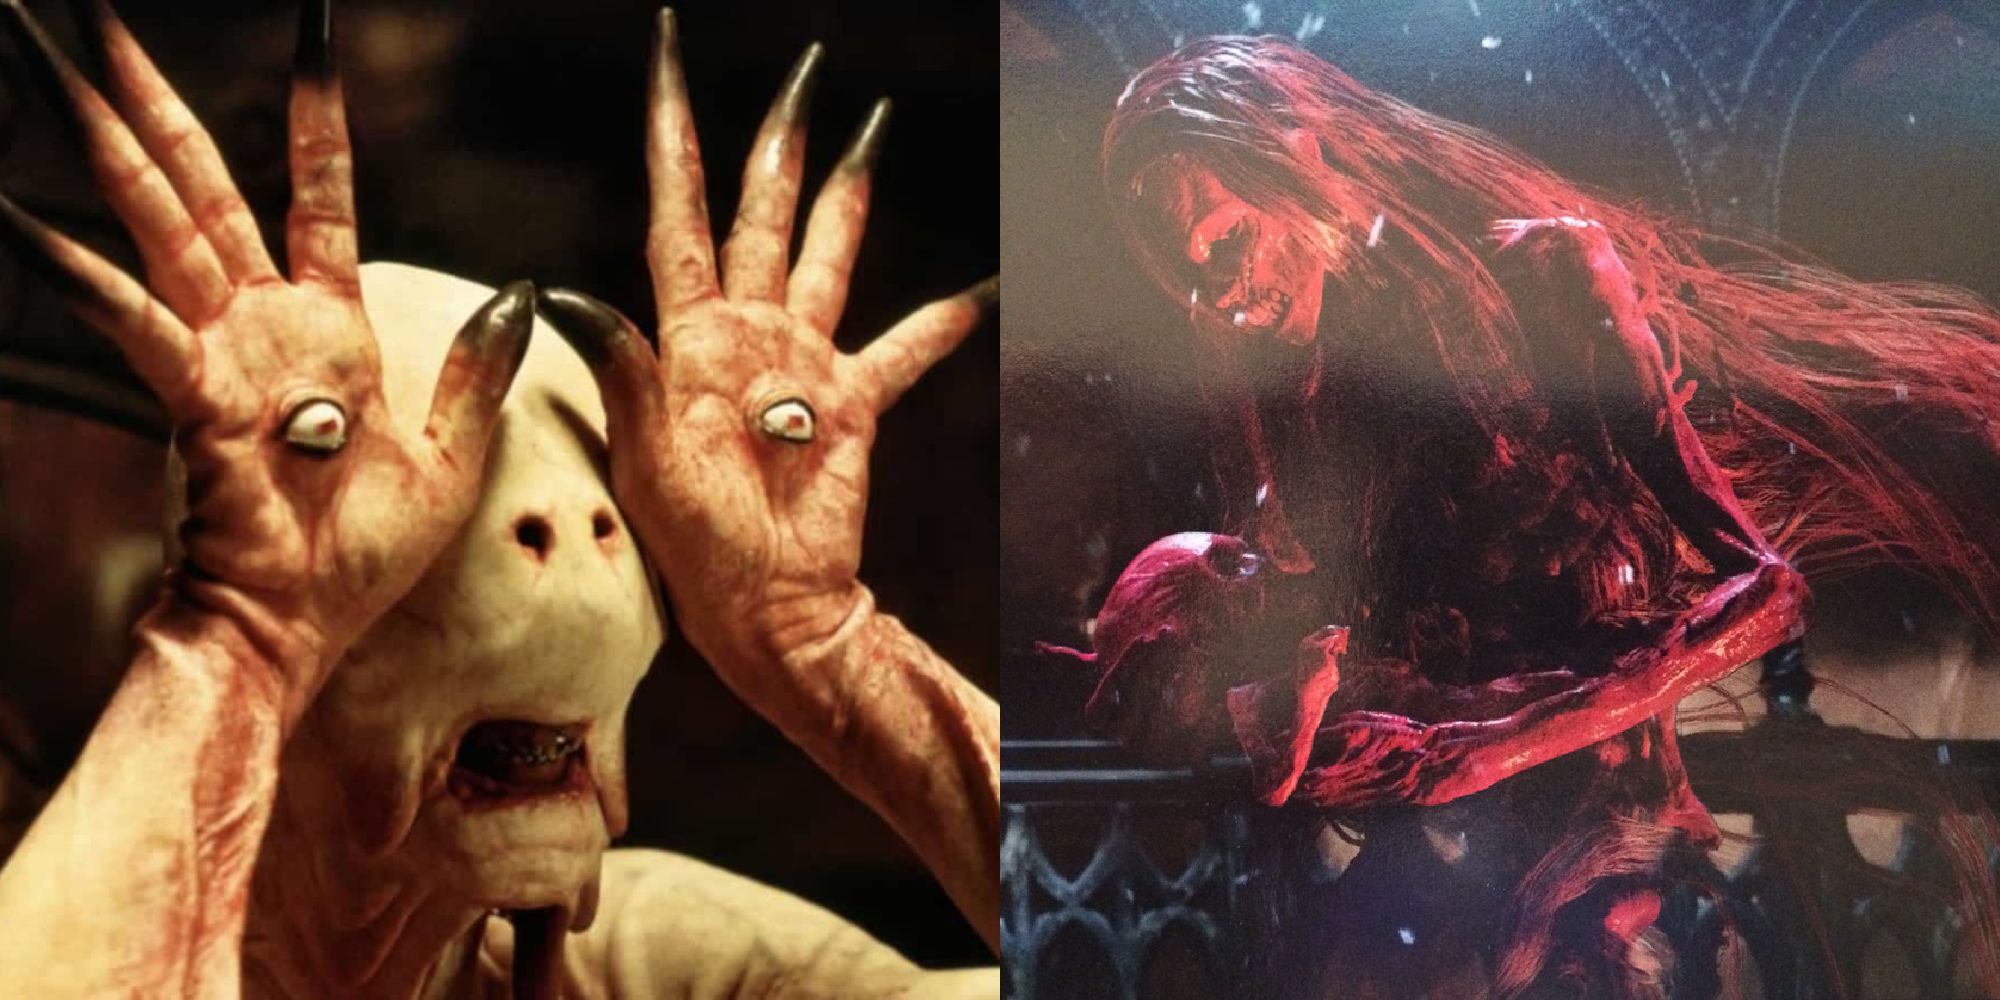 The Pale Man from Pans Labyrinth and Enola from Crimson Peak.